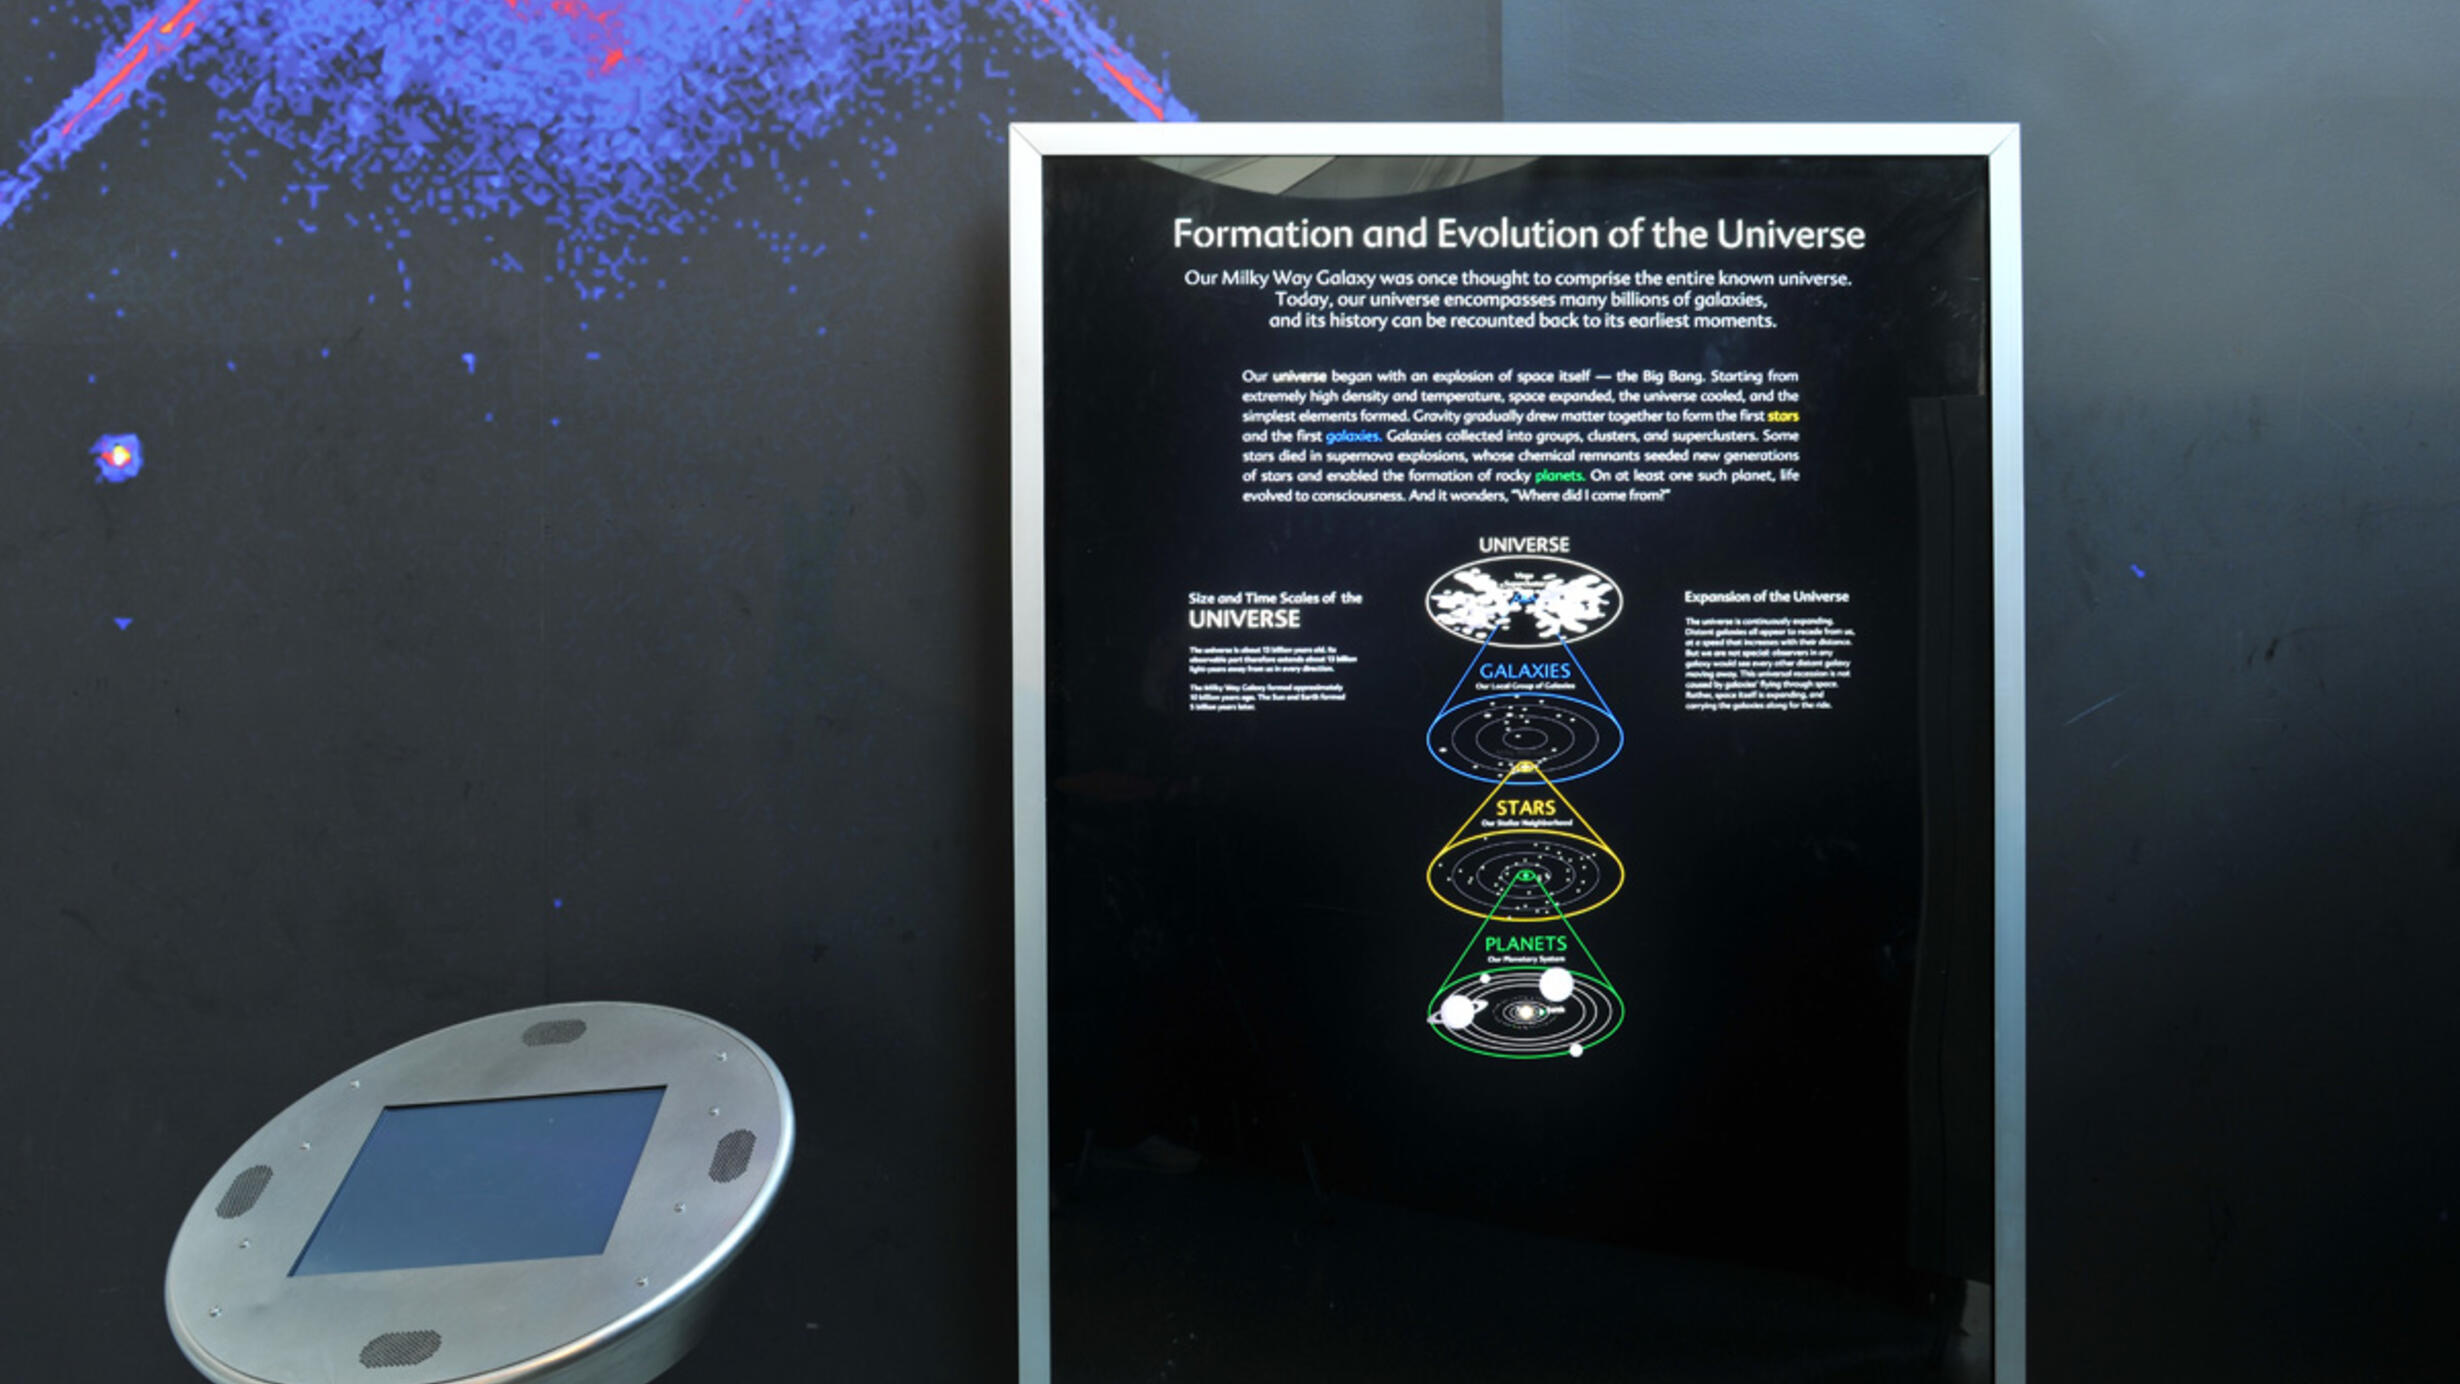 Part of exhibit on formation and evolution of the galaxies